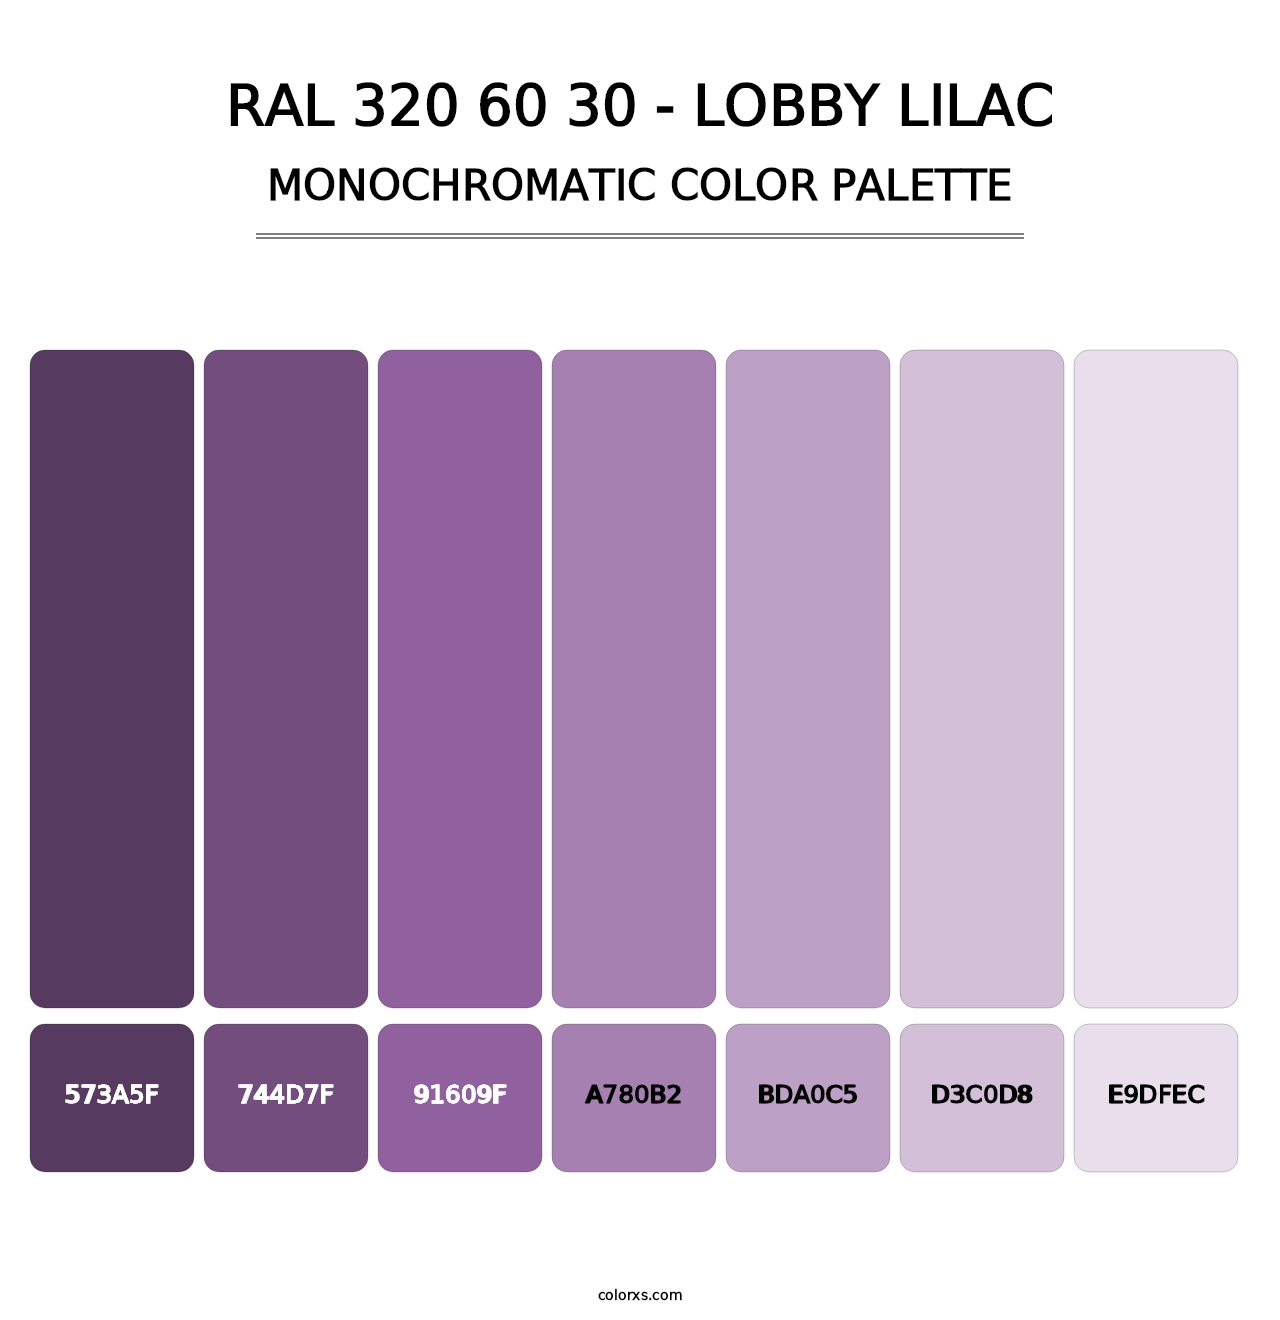 RAL 320 60 30 - Lobby Lilac - Monochromatic Color Palette